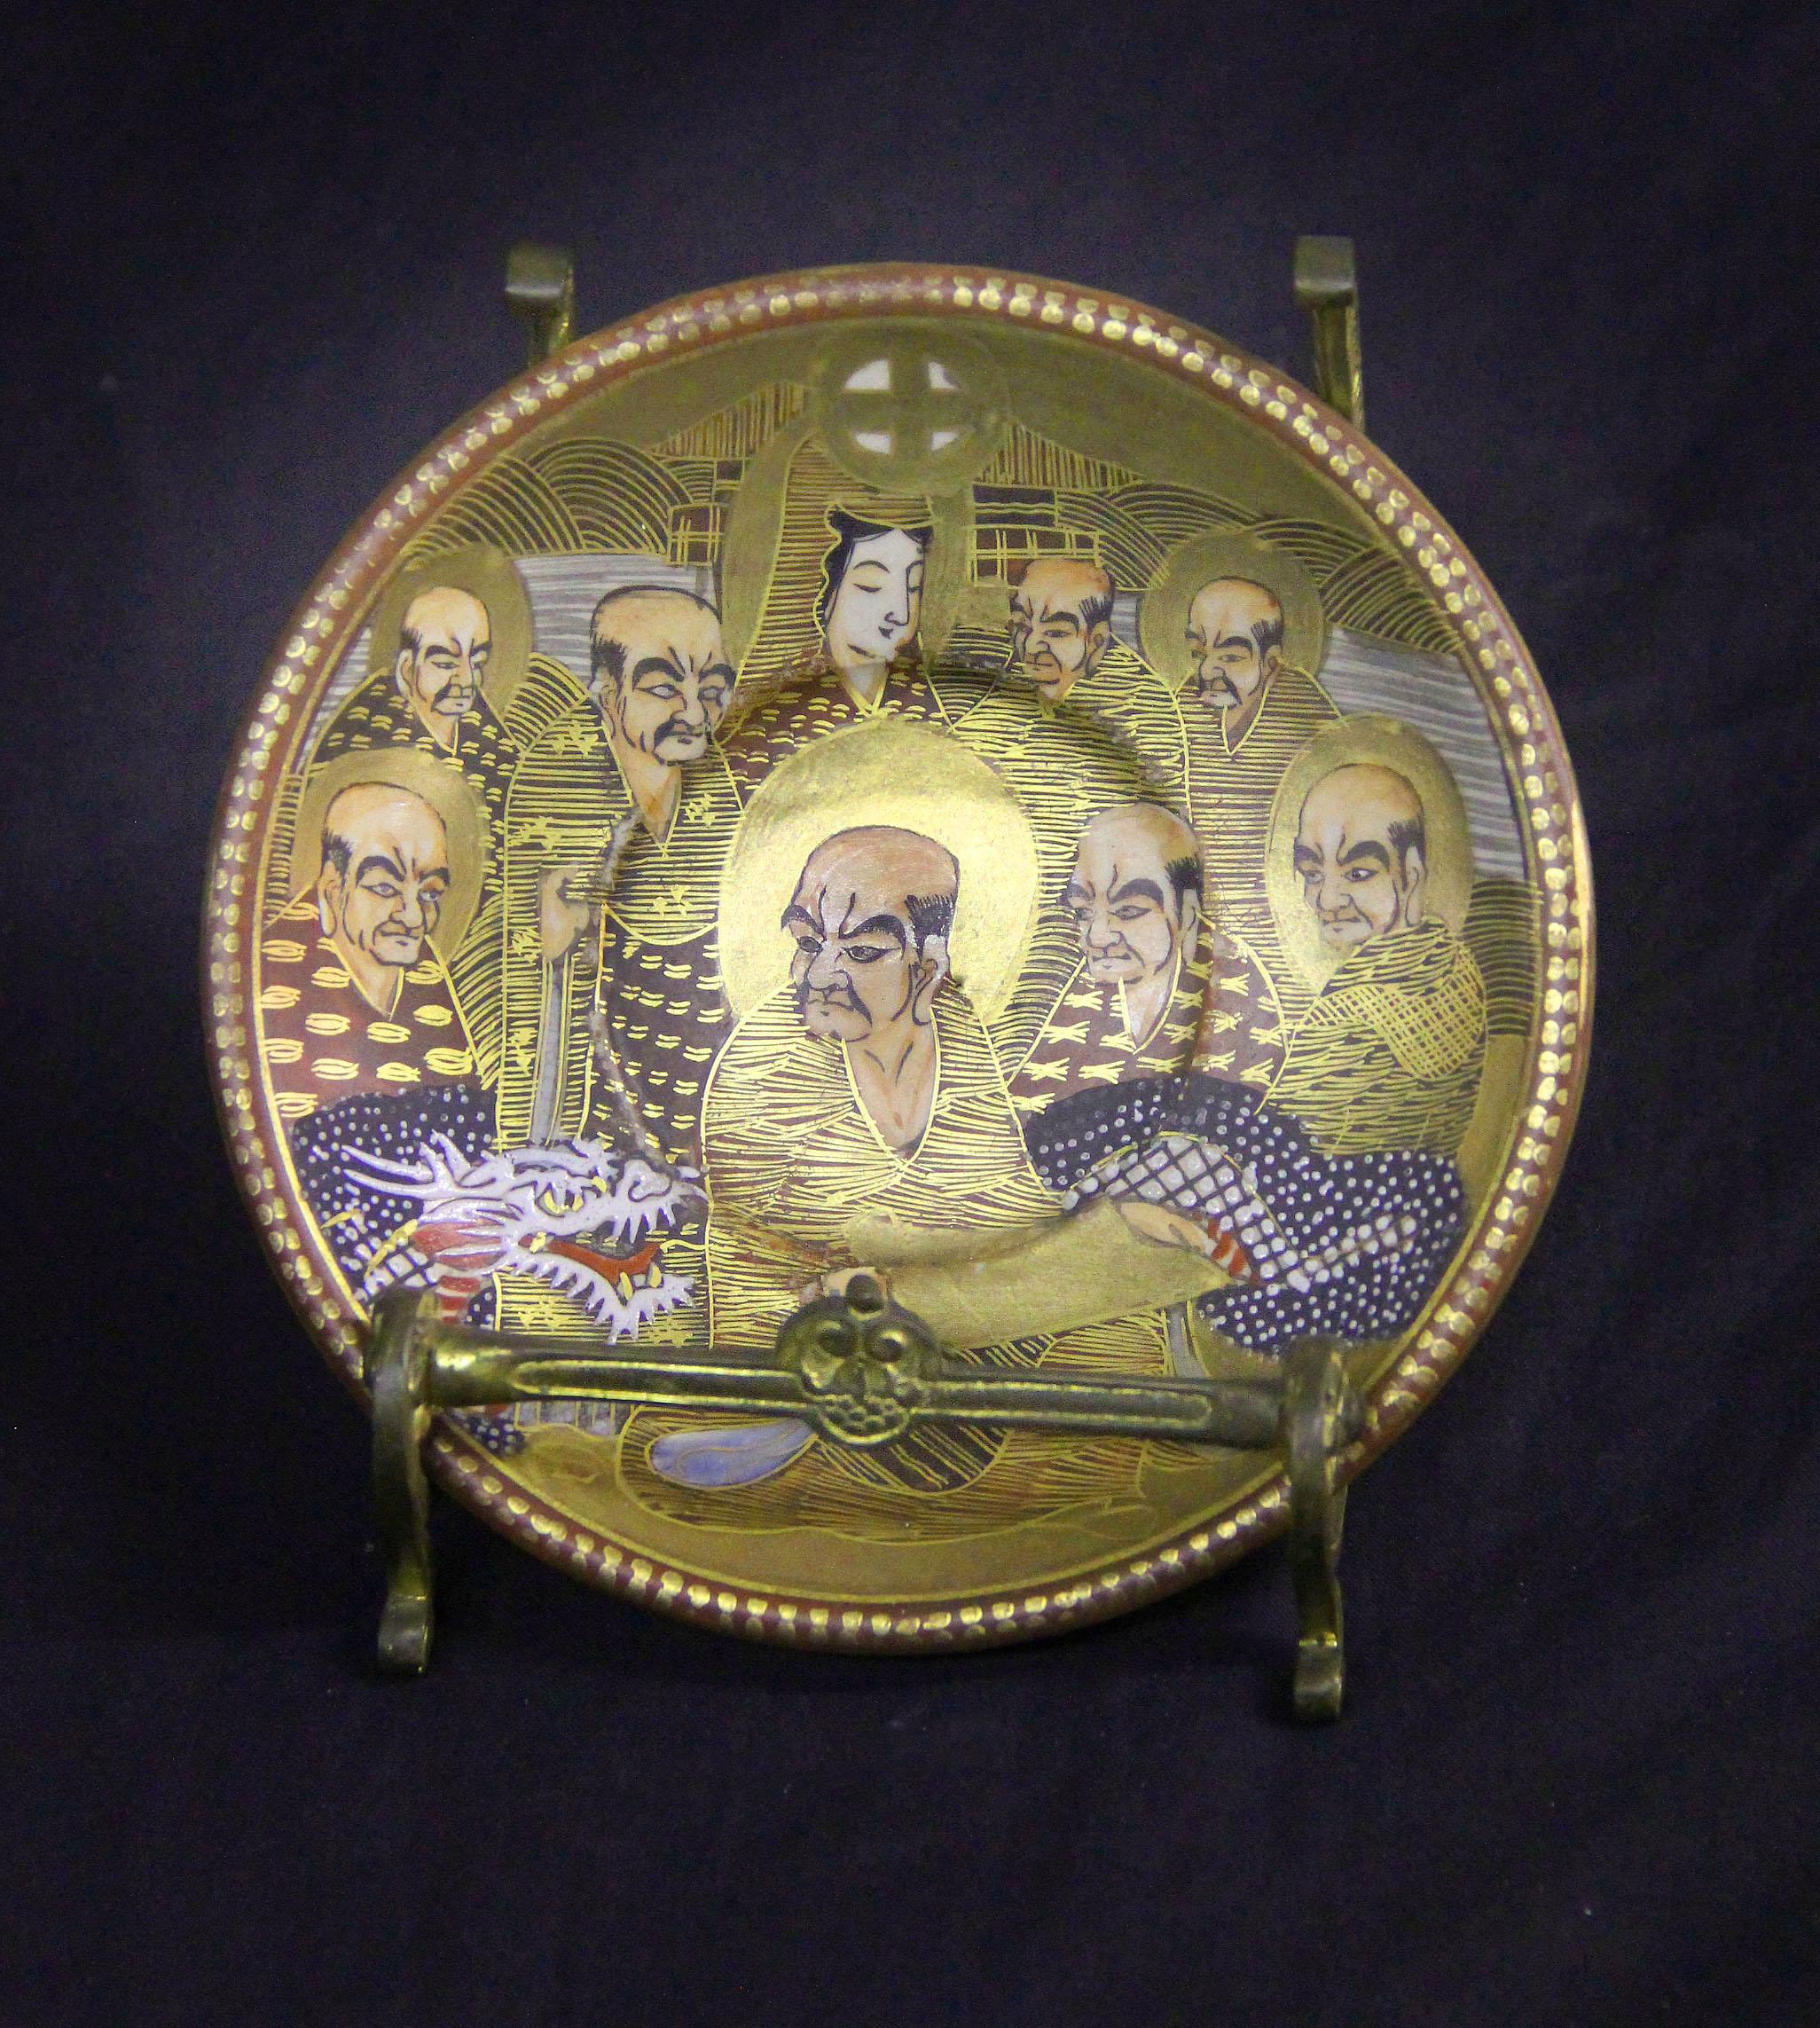 A Nice Early 20th Century Japanese Imperial Satsuma Porcelain Plate

Beautifully painted with men, women and a dragon, sitting in a bronze frame.

Details:
Height on stand – 4 inches / 10cm
Diameter of Plate – 4.75 inches /12cm